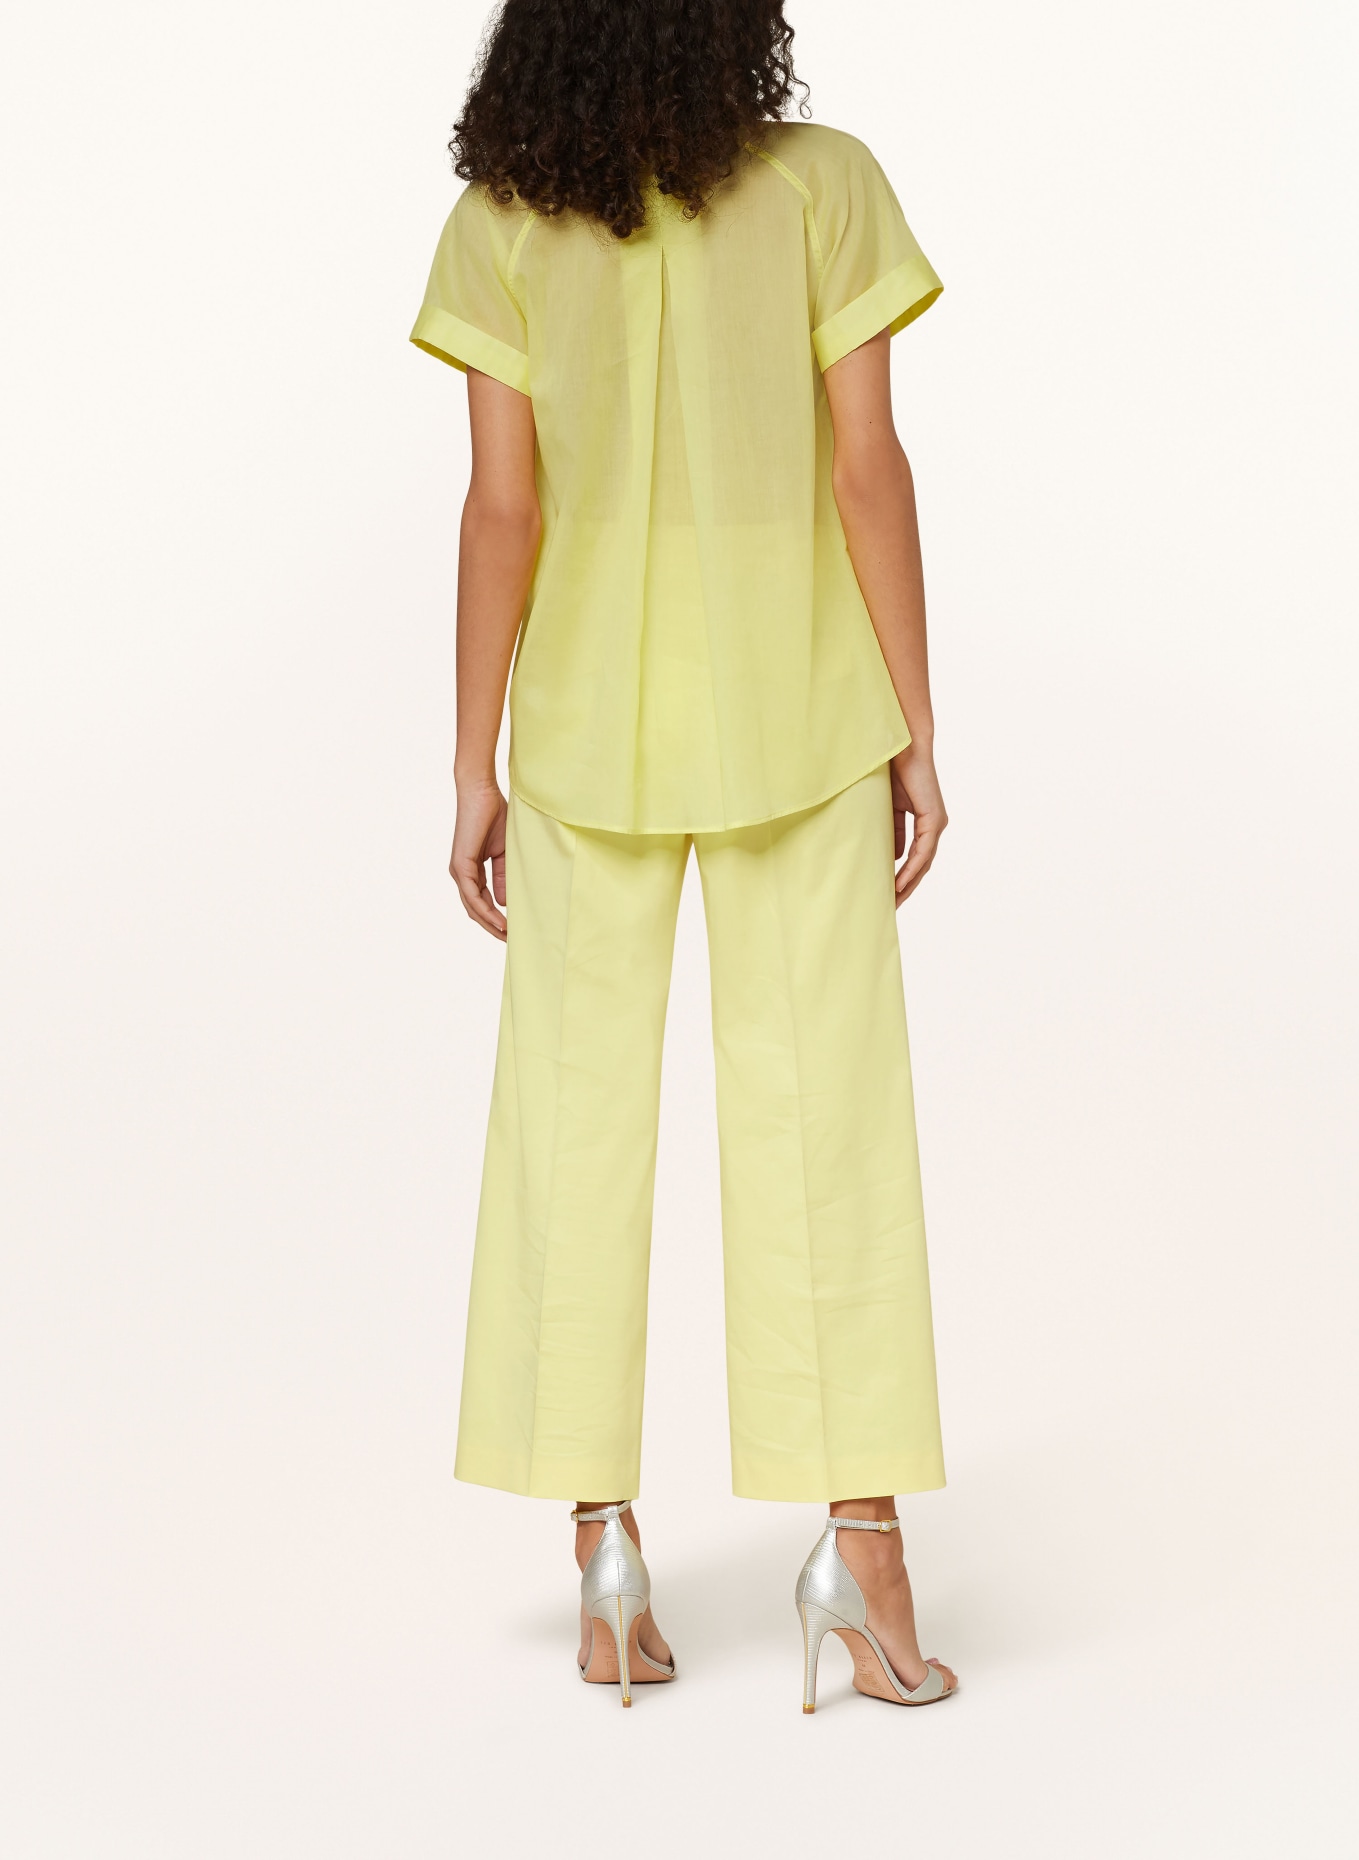 windsor. Blouse with detachable bow tie, Color: YELLOW (Image 3)